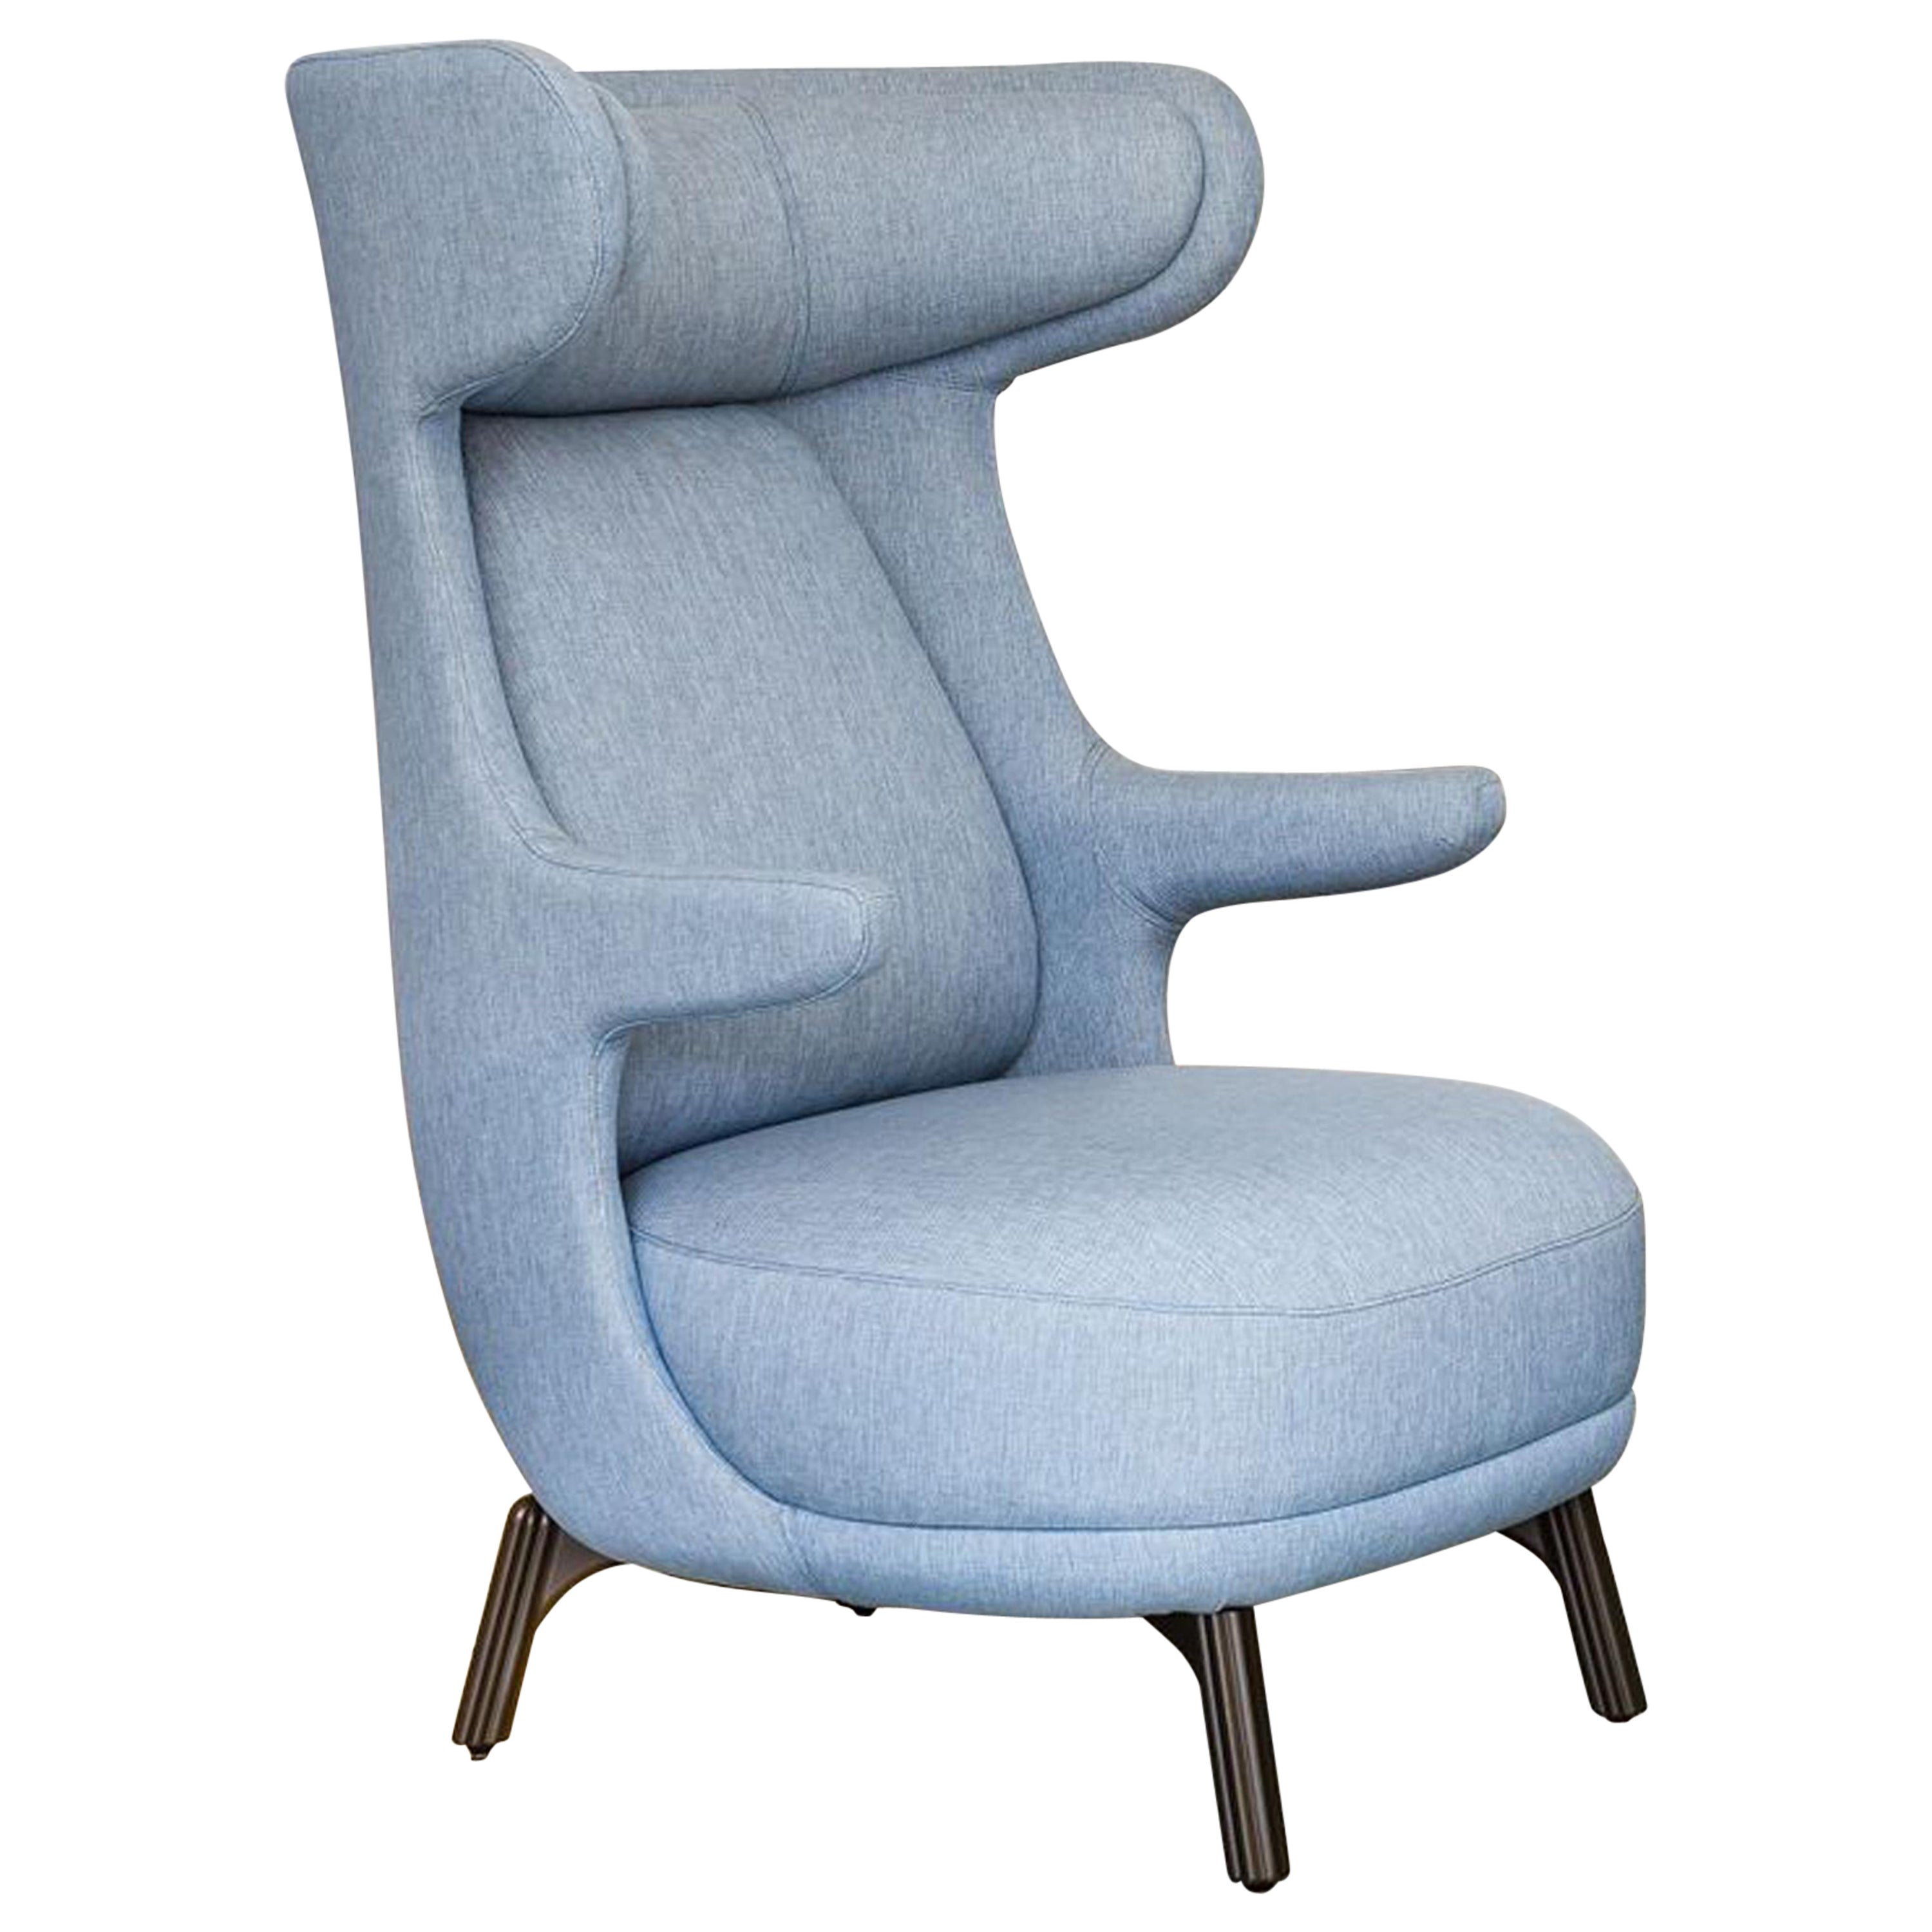 Jaime Hayon, Contemporary, Monocolor in Blue Fabric Upholstery Dino Armchair For Sale